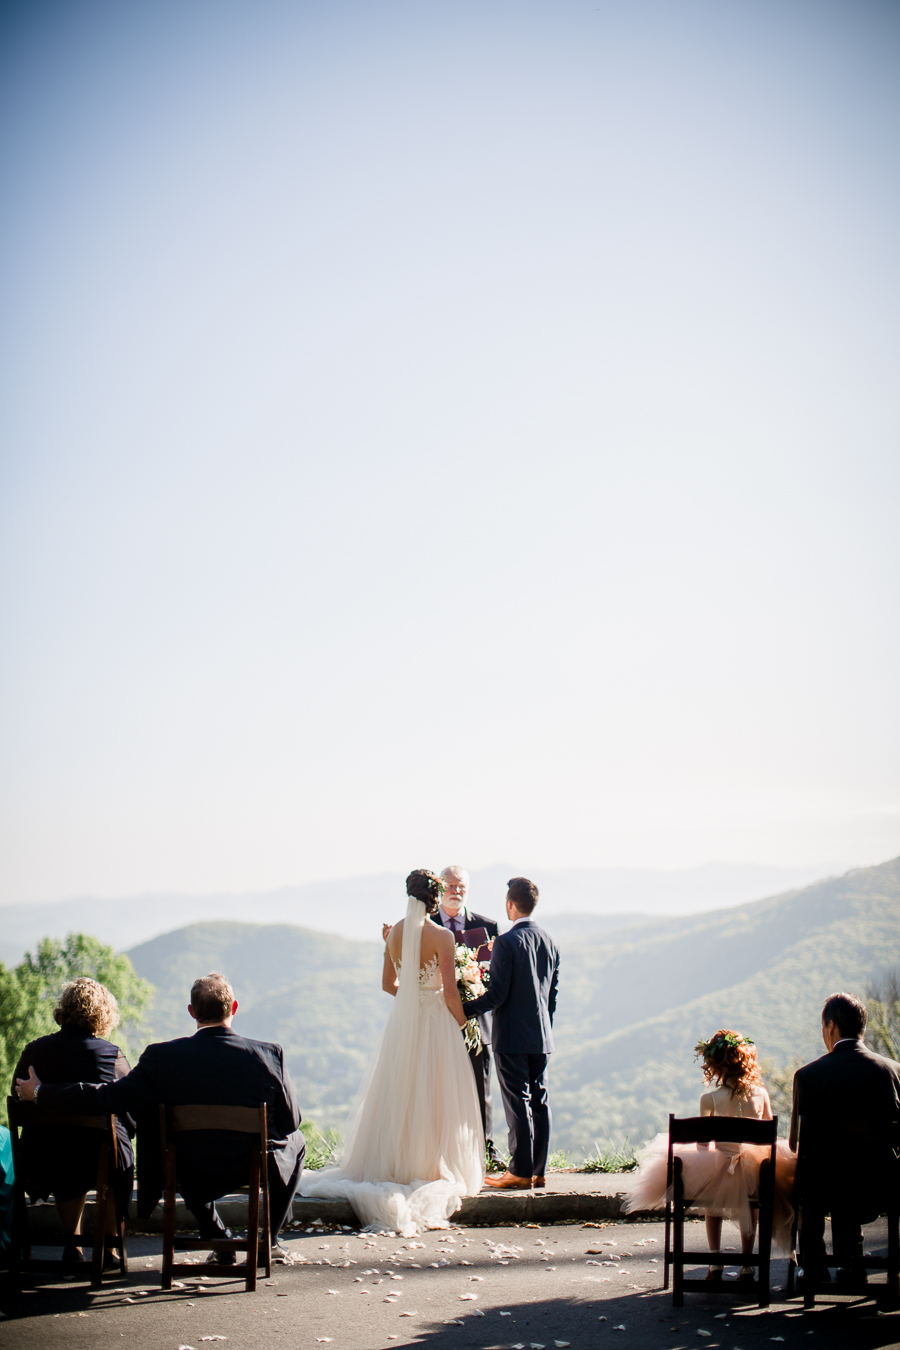 Mountain view ceremony at this North Carolina Elopement by Knoxville Wedding Photographer, Amanda May Photos.